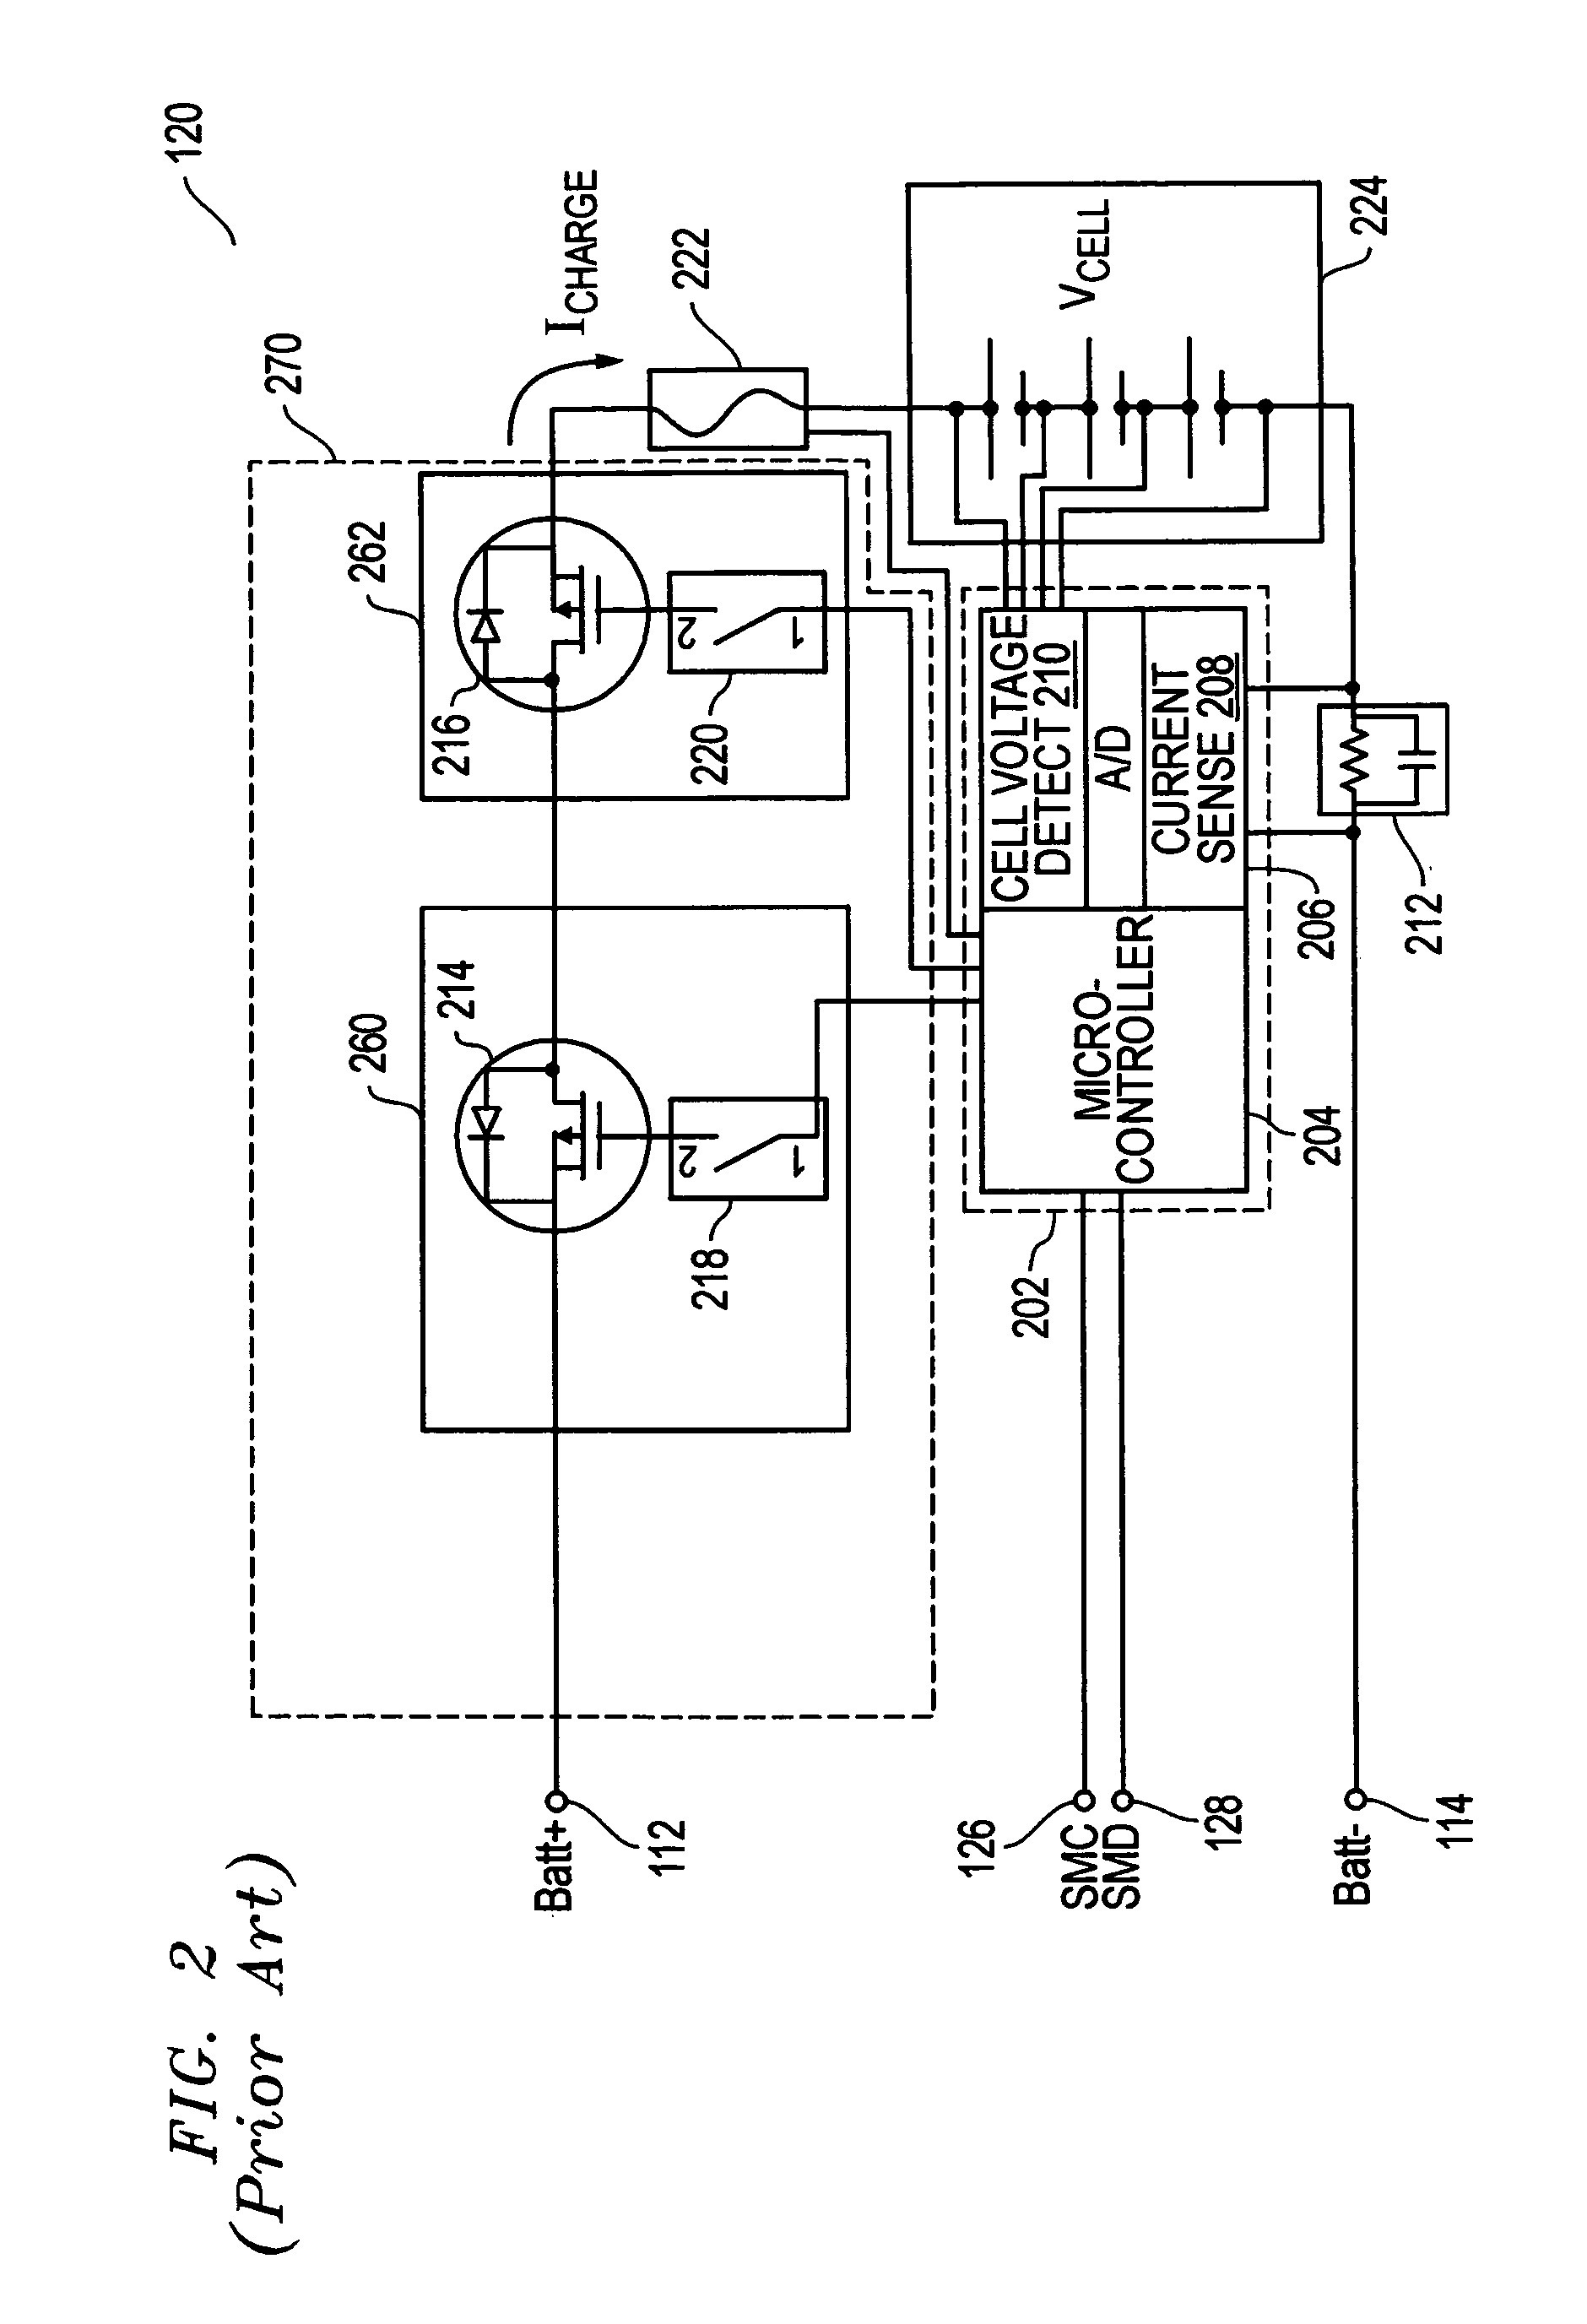 Systems and methods for detecting charge switching element failure in a battery system